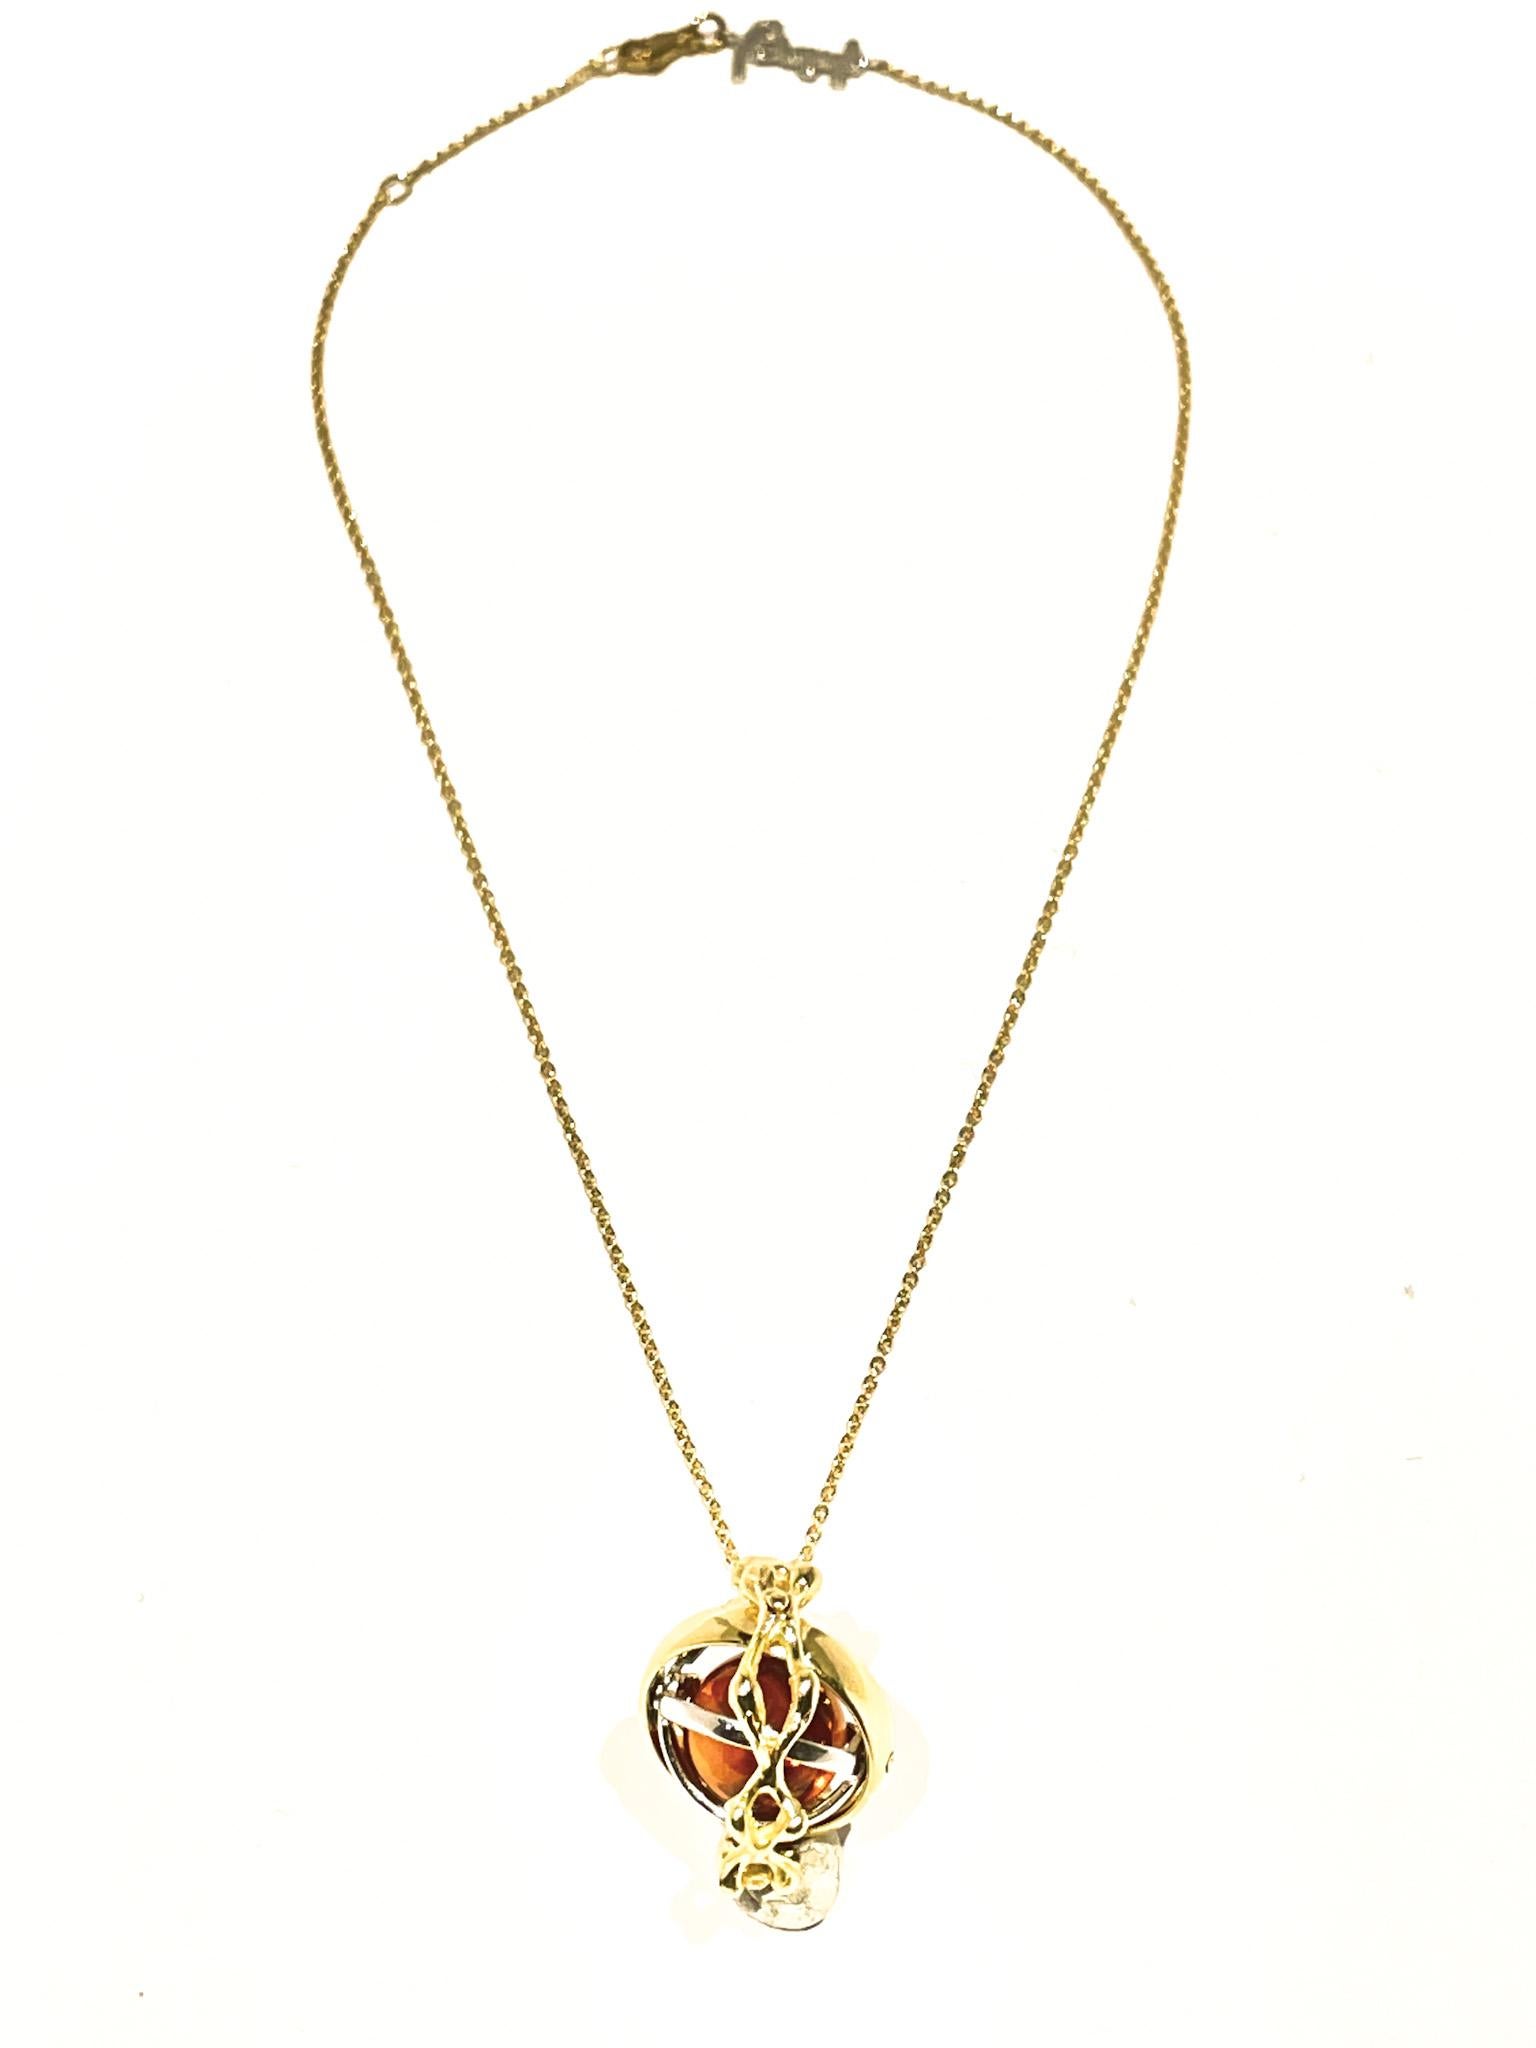 Changeable Gem Revolving Loops Essence Made in Italy Crysoprase 18k Gold Pendant For Sale 1